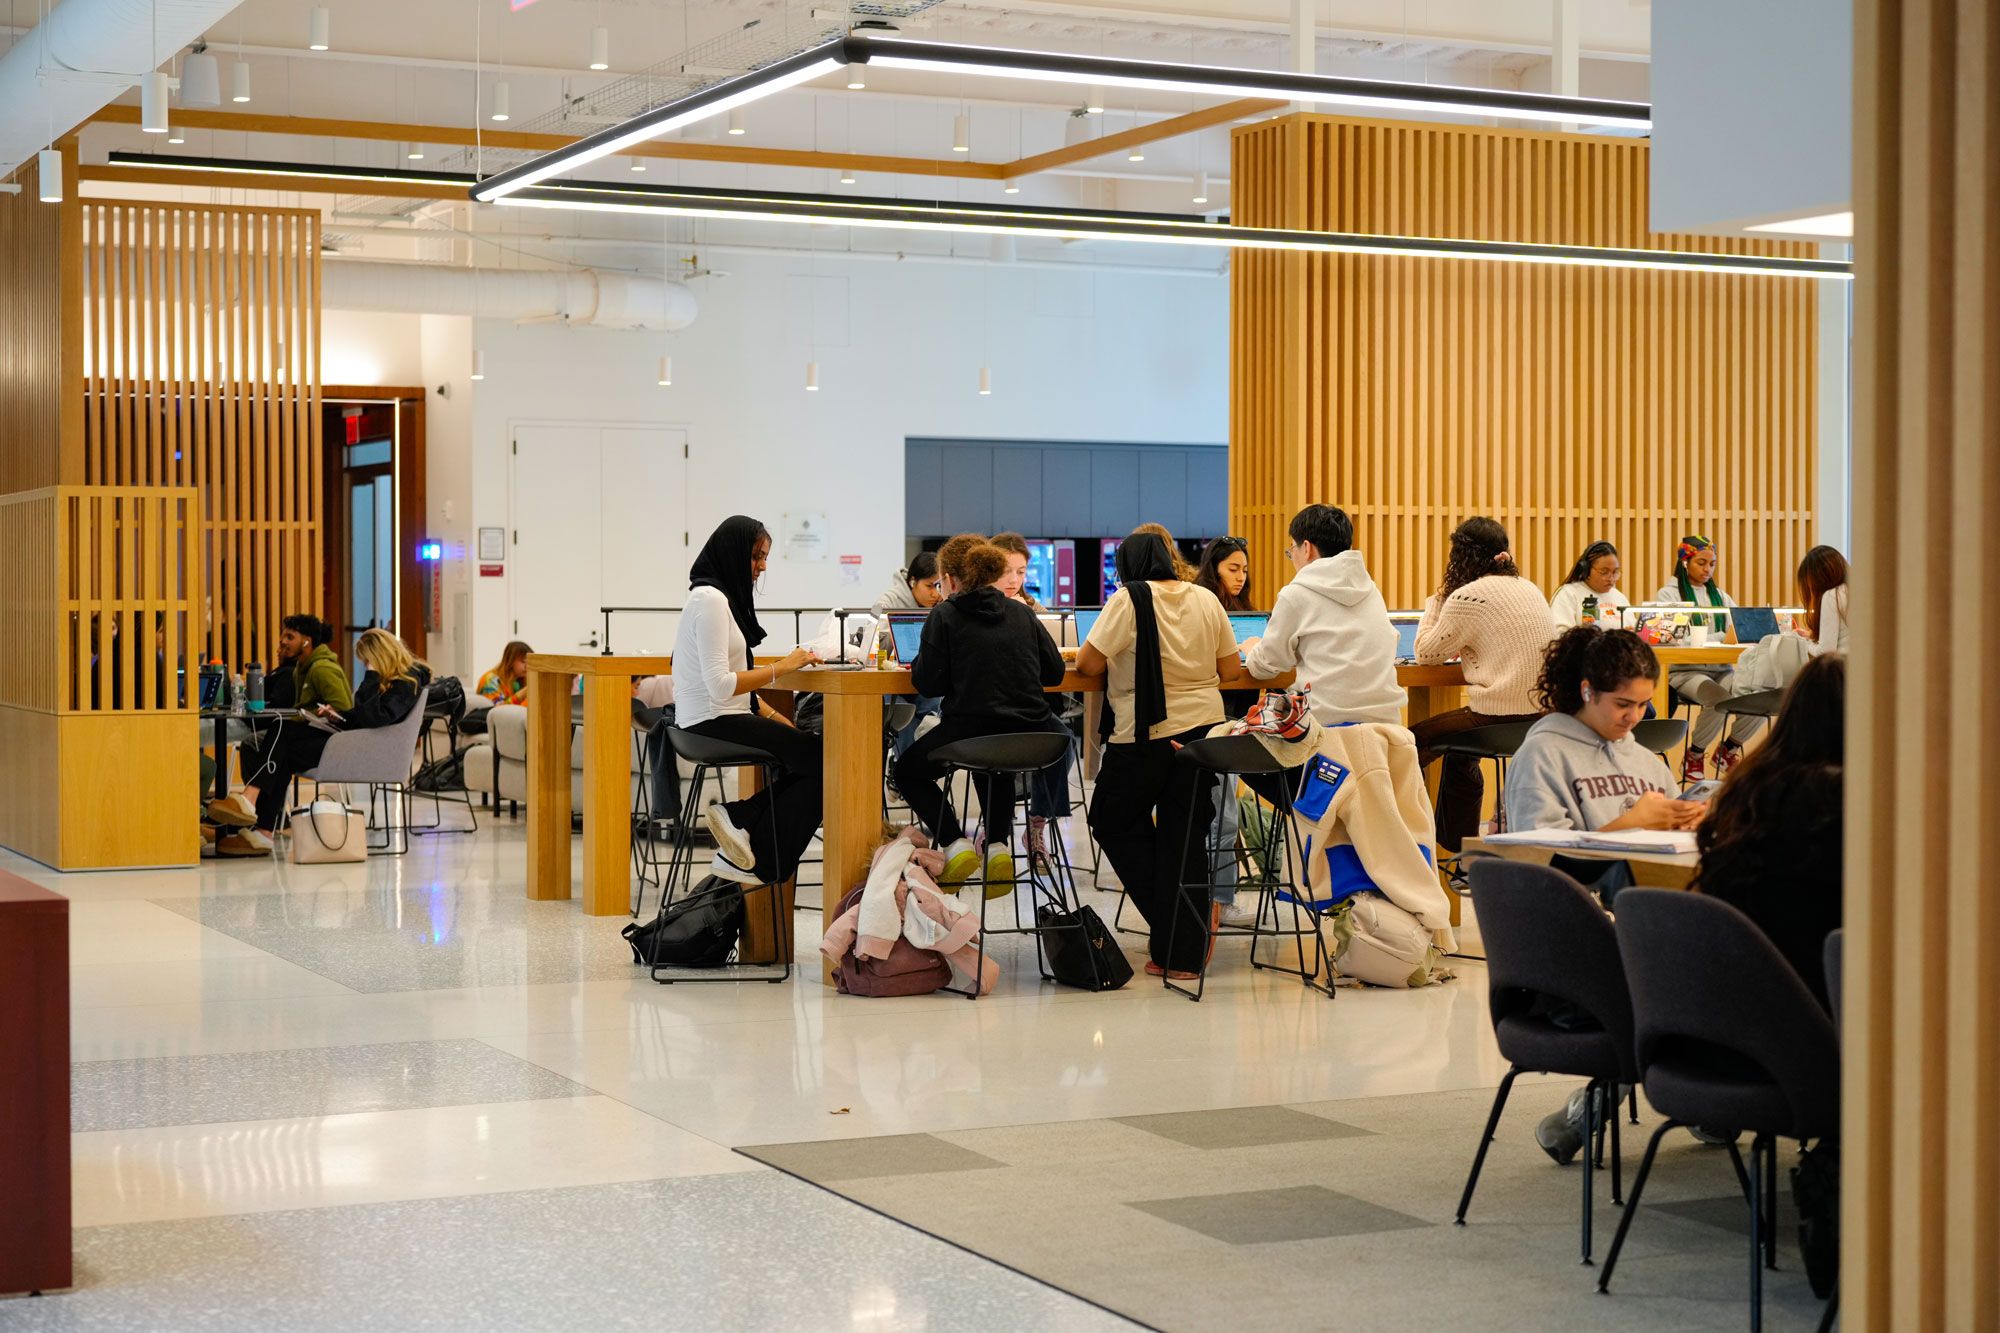 Many students study at a tall communal table in the McShane Center at Rose Hill